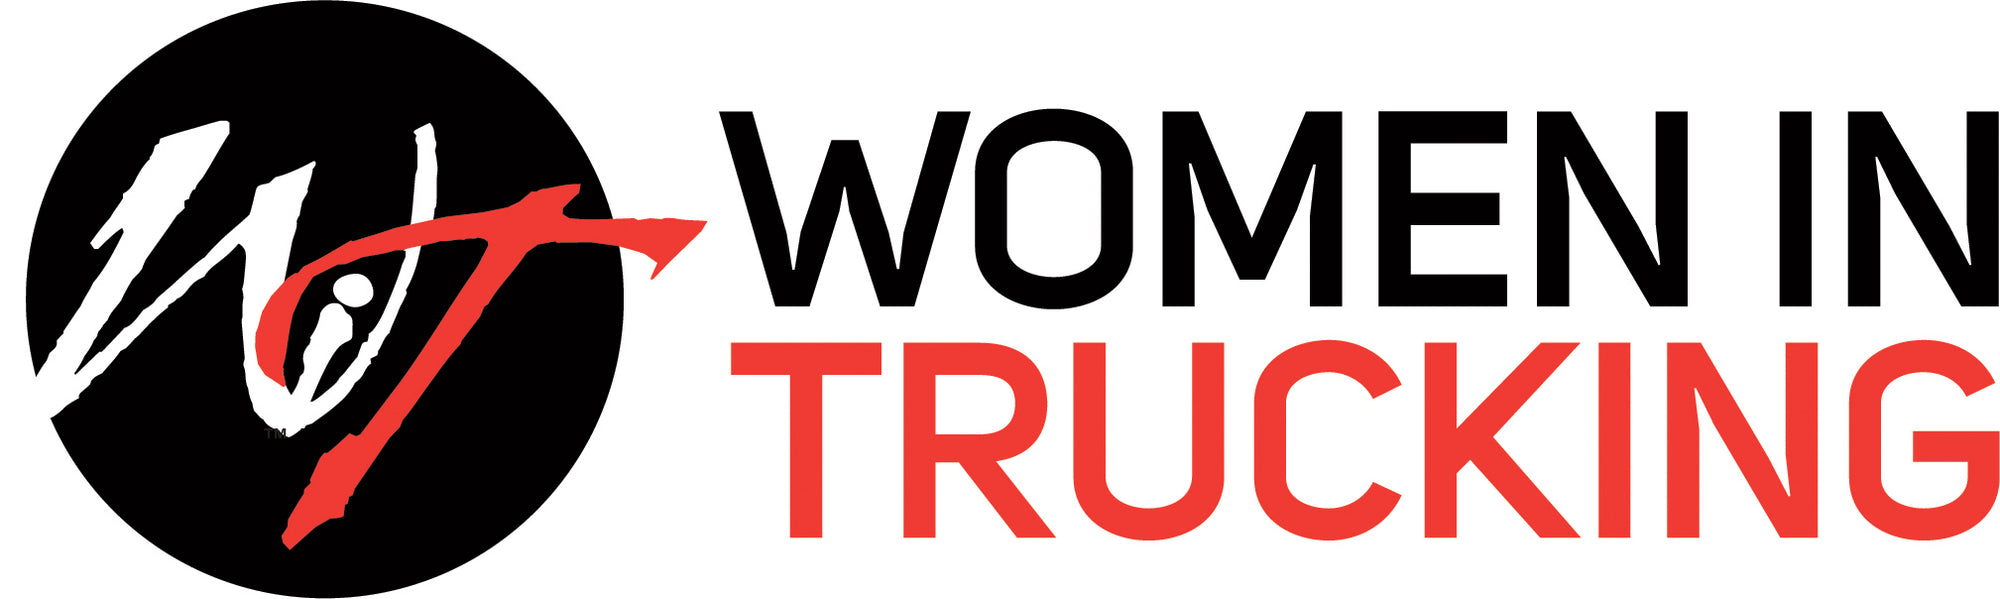 Supporting Women in Trucking